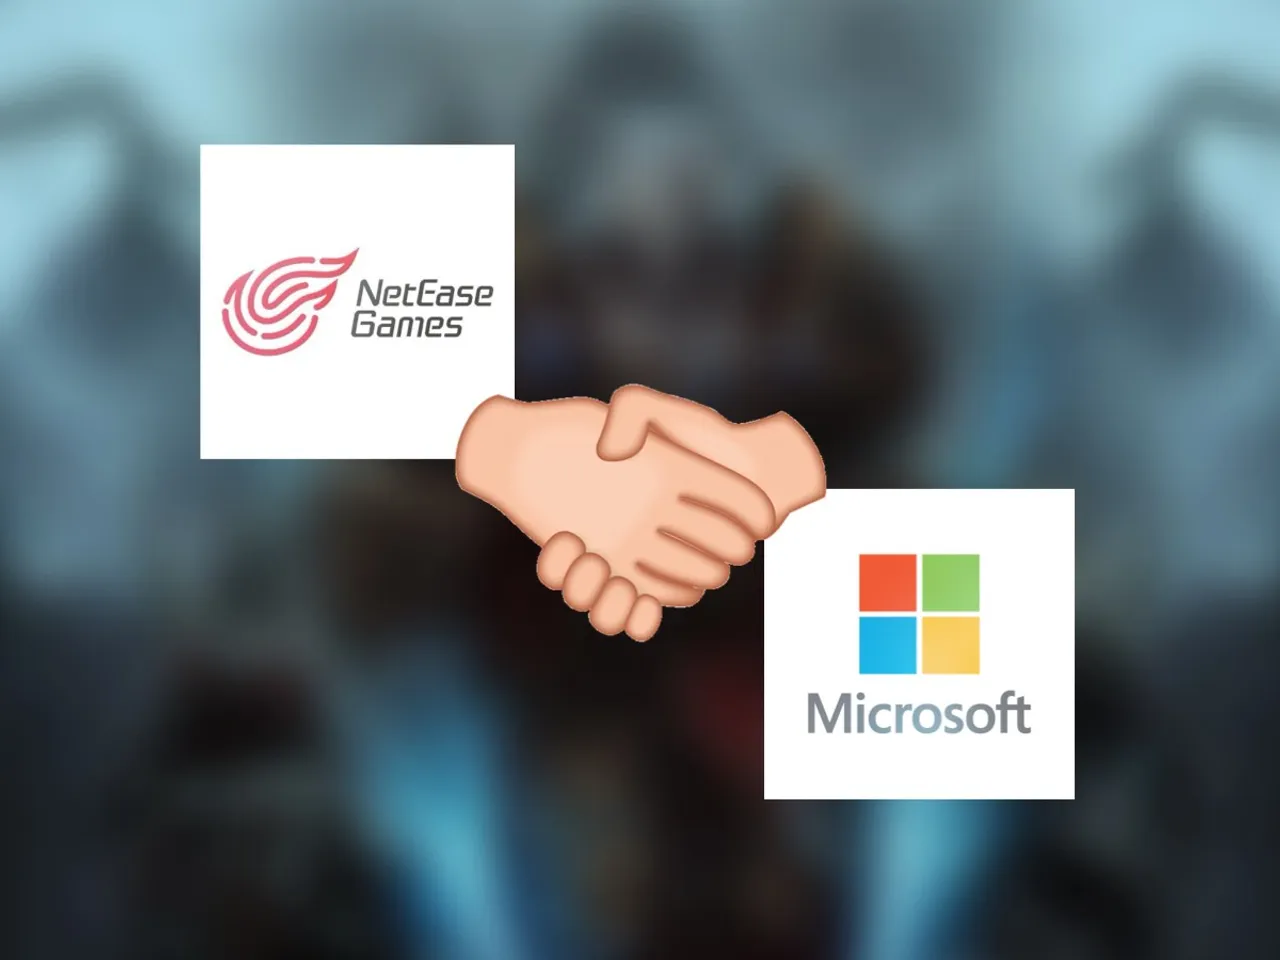 Microsoft and NetEase Collaboration